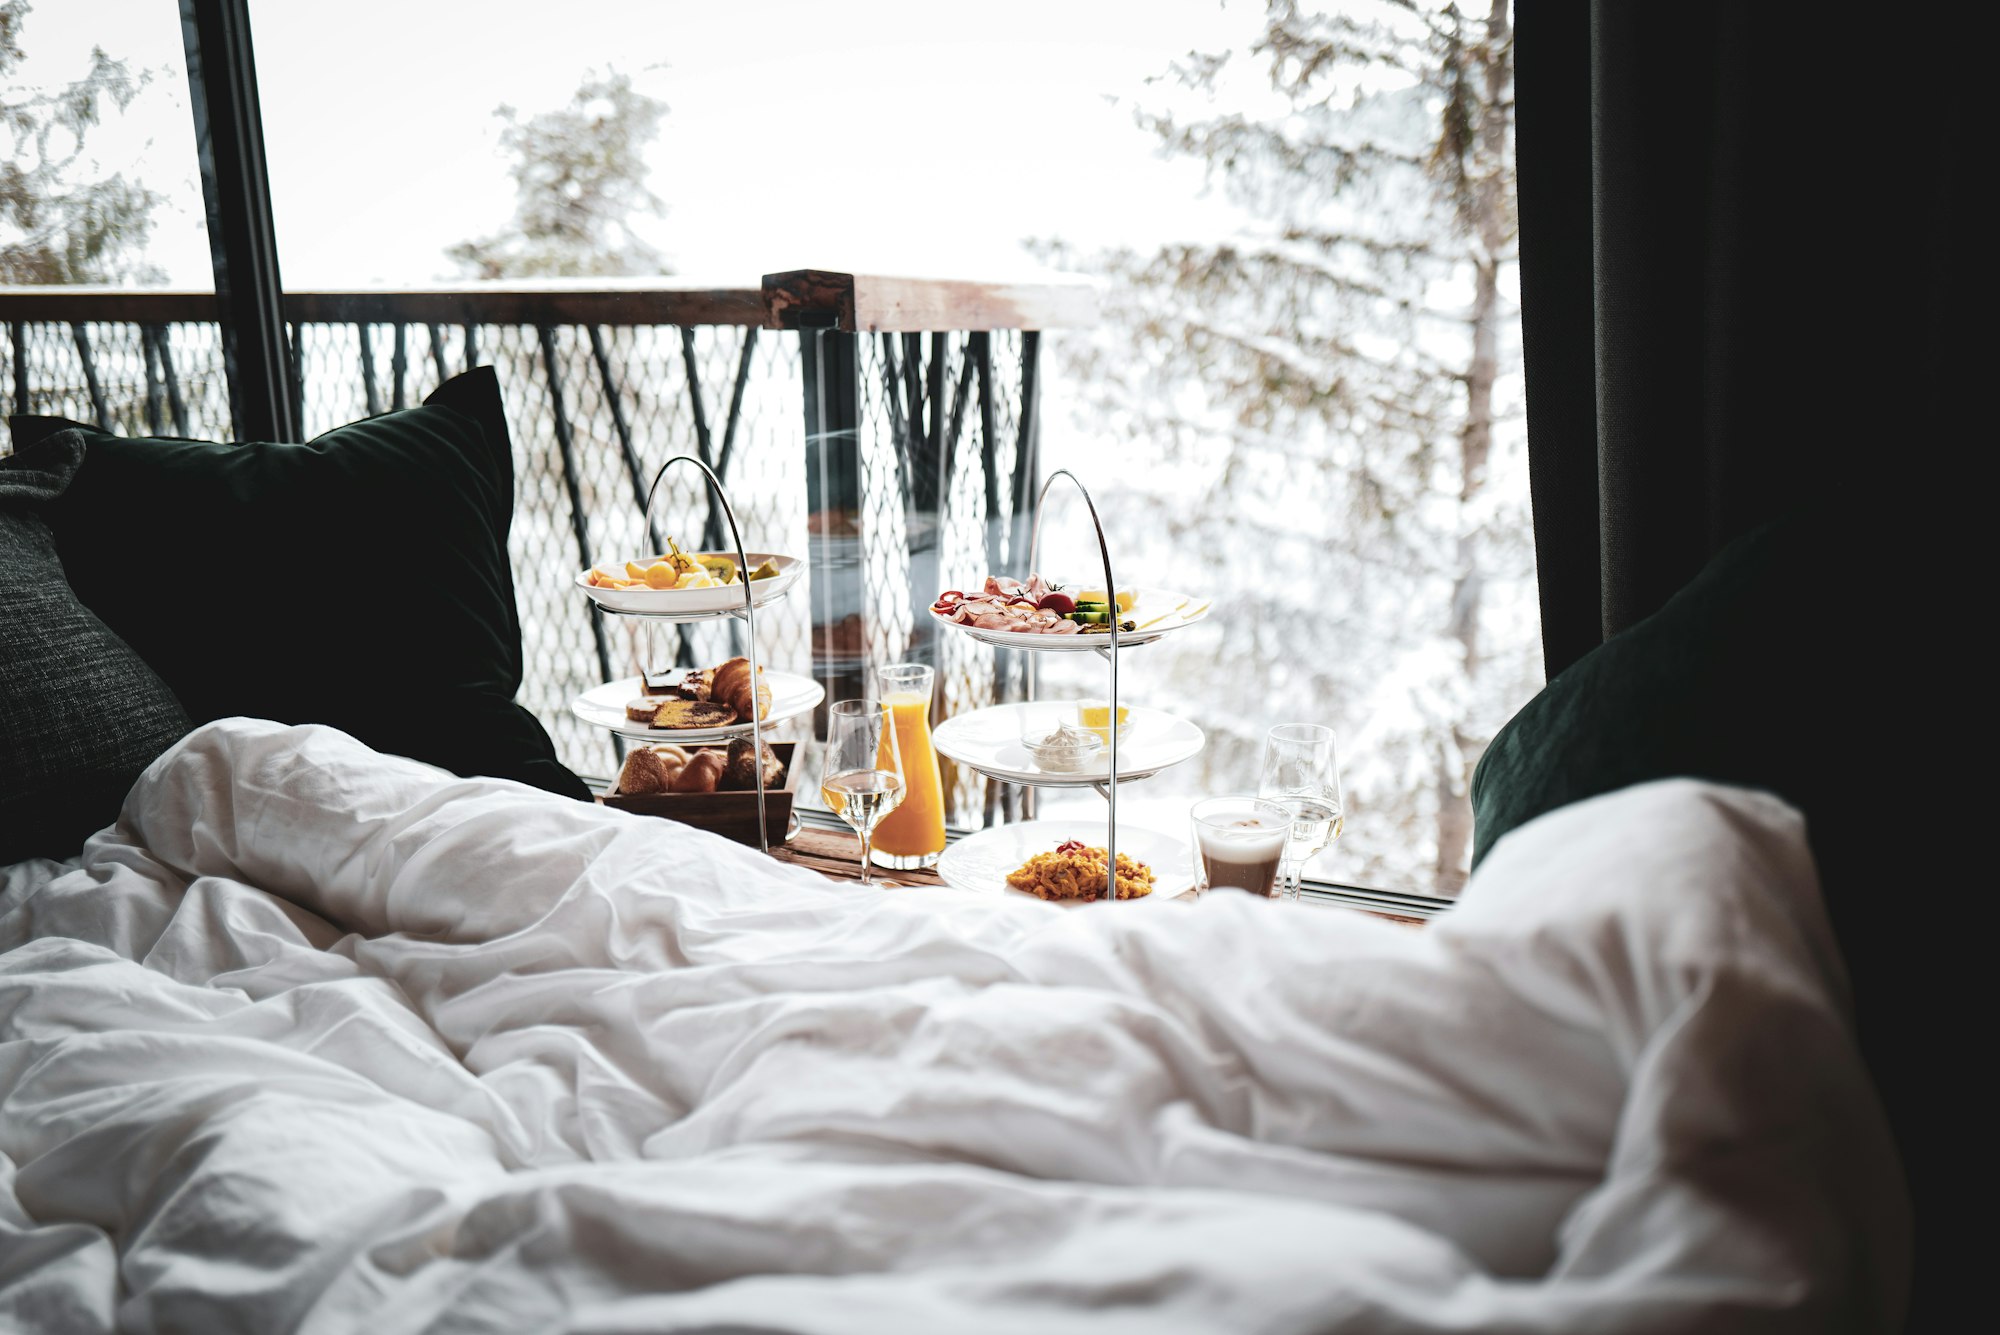 cold and cozy moments 